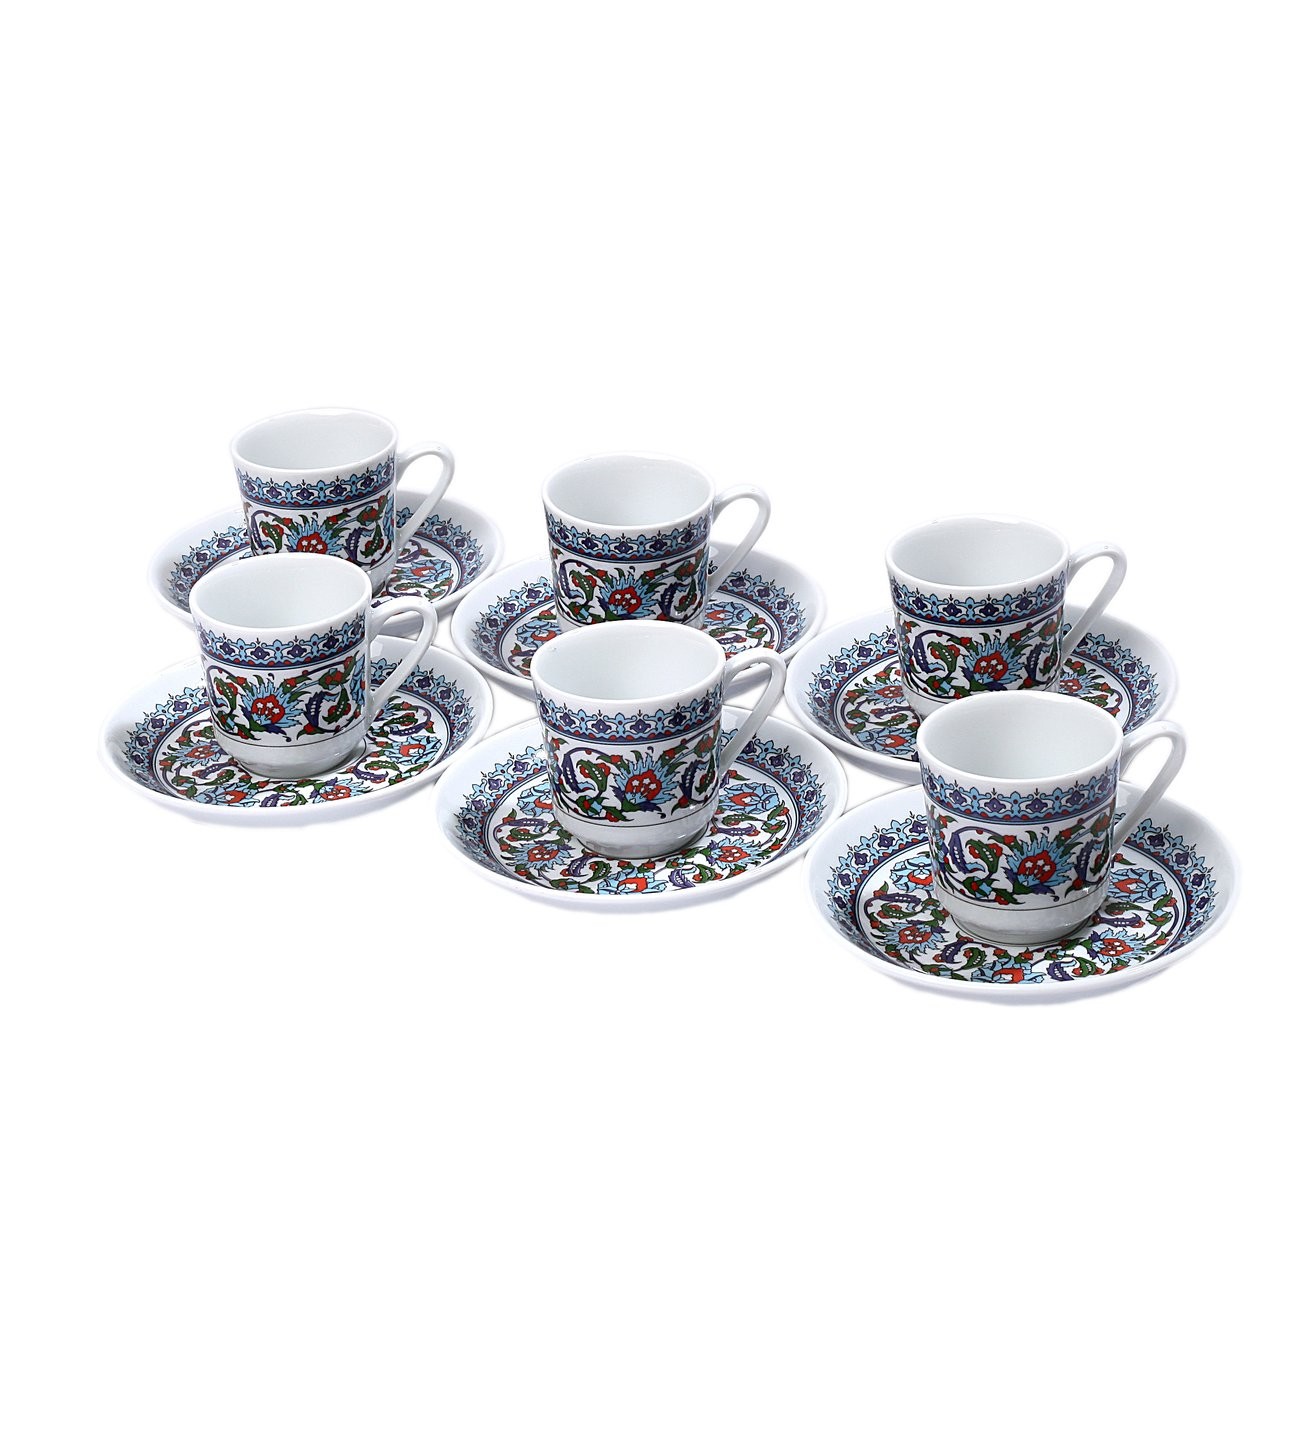 Turkish Coffee Cup Set, Topkapi Design Coffee Set, Colorful Decorated Design For 6 Person 